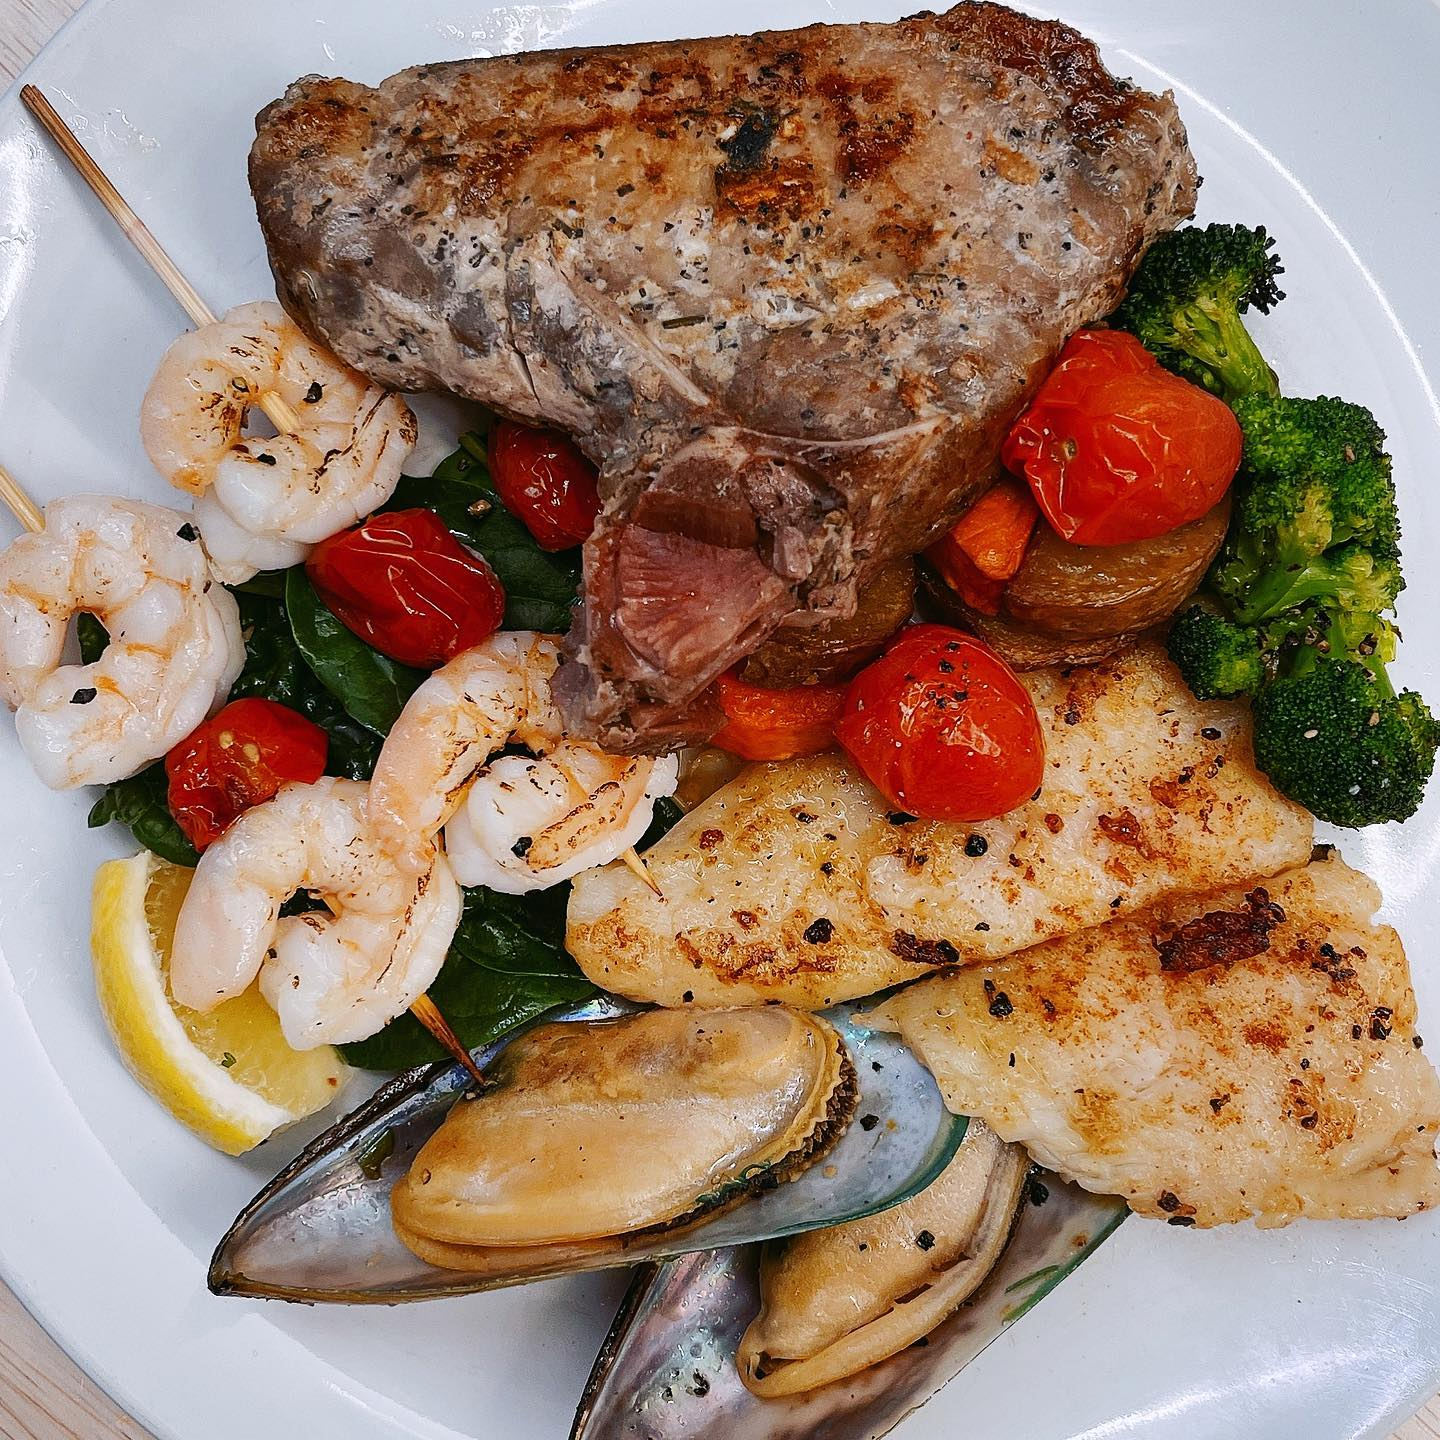 surf and turf - prawns, fish, mussels and beef served with brocolli and cherry tomatoes